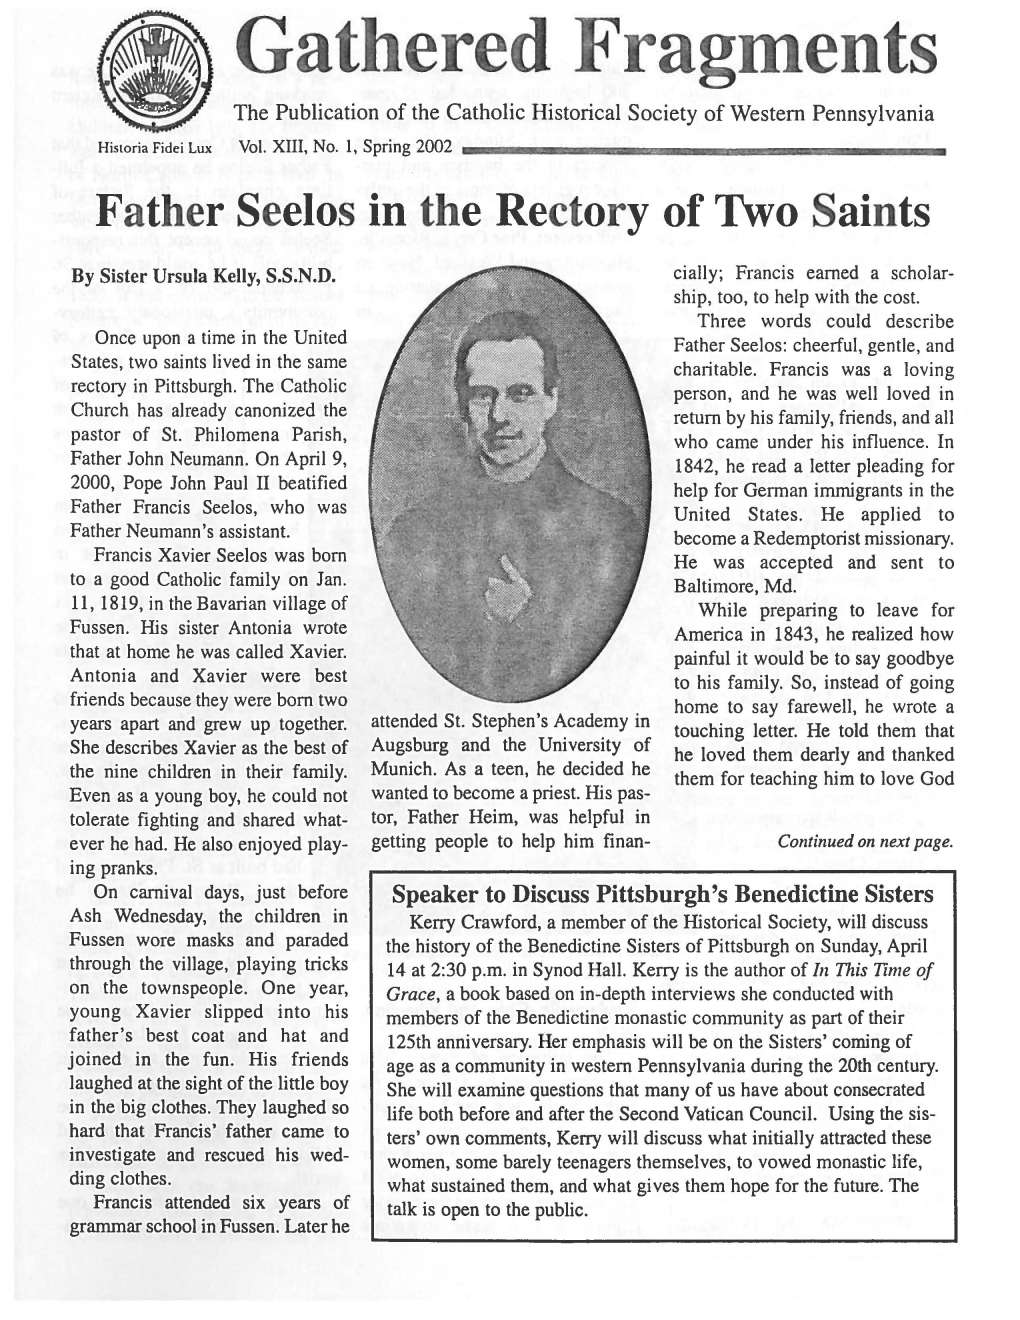 Father Seelos in the Rectory of Two Saints